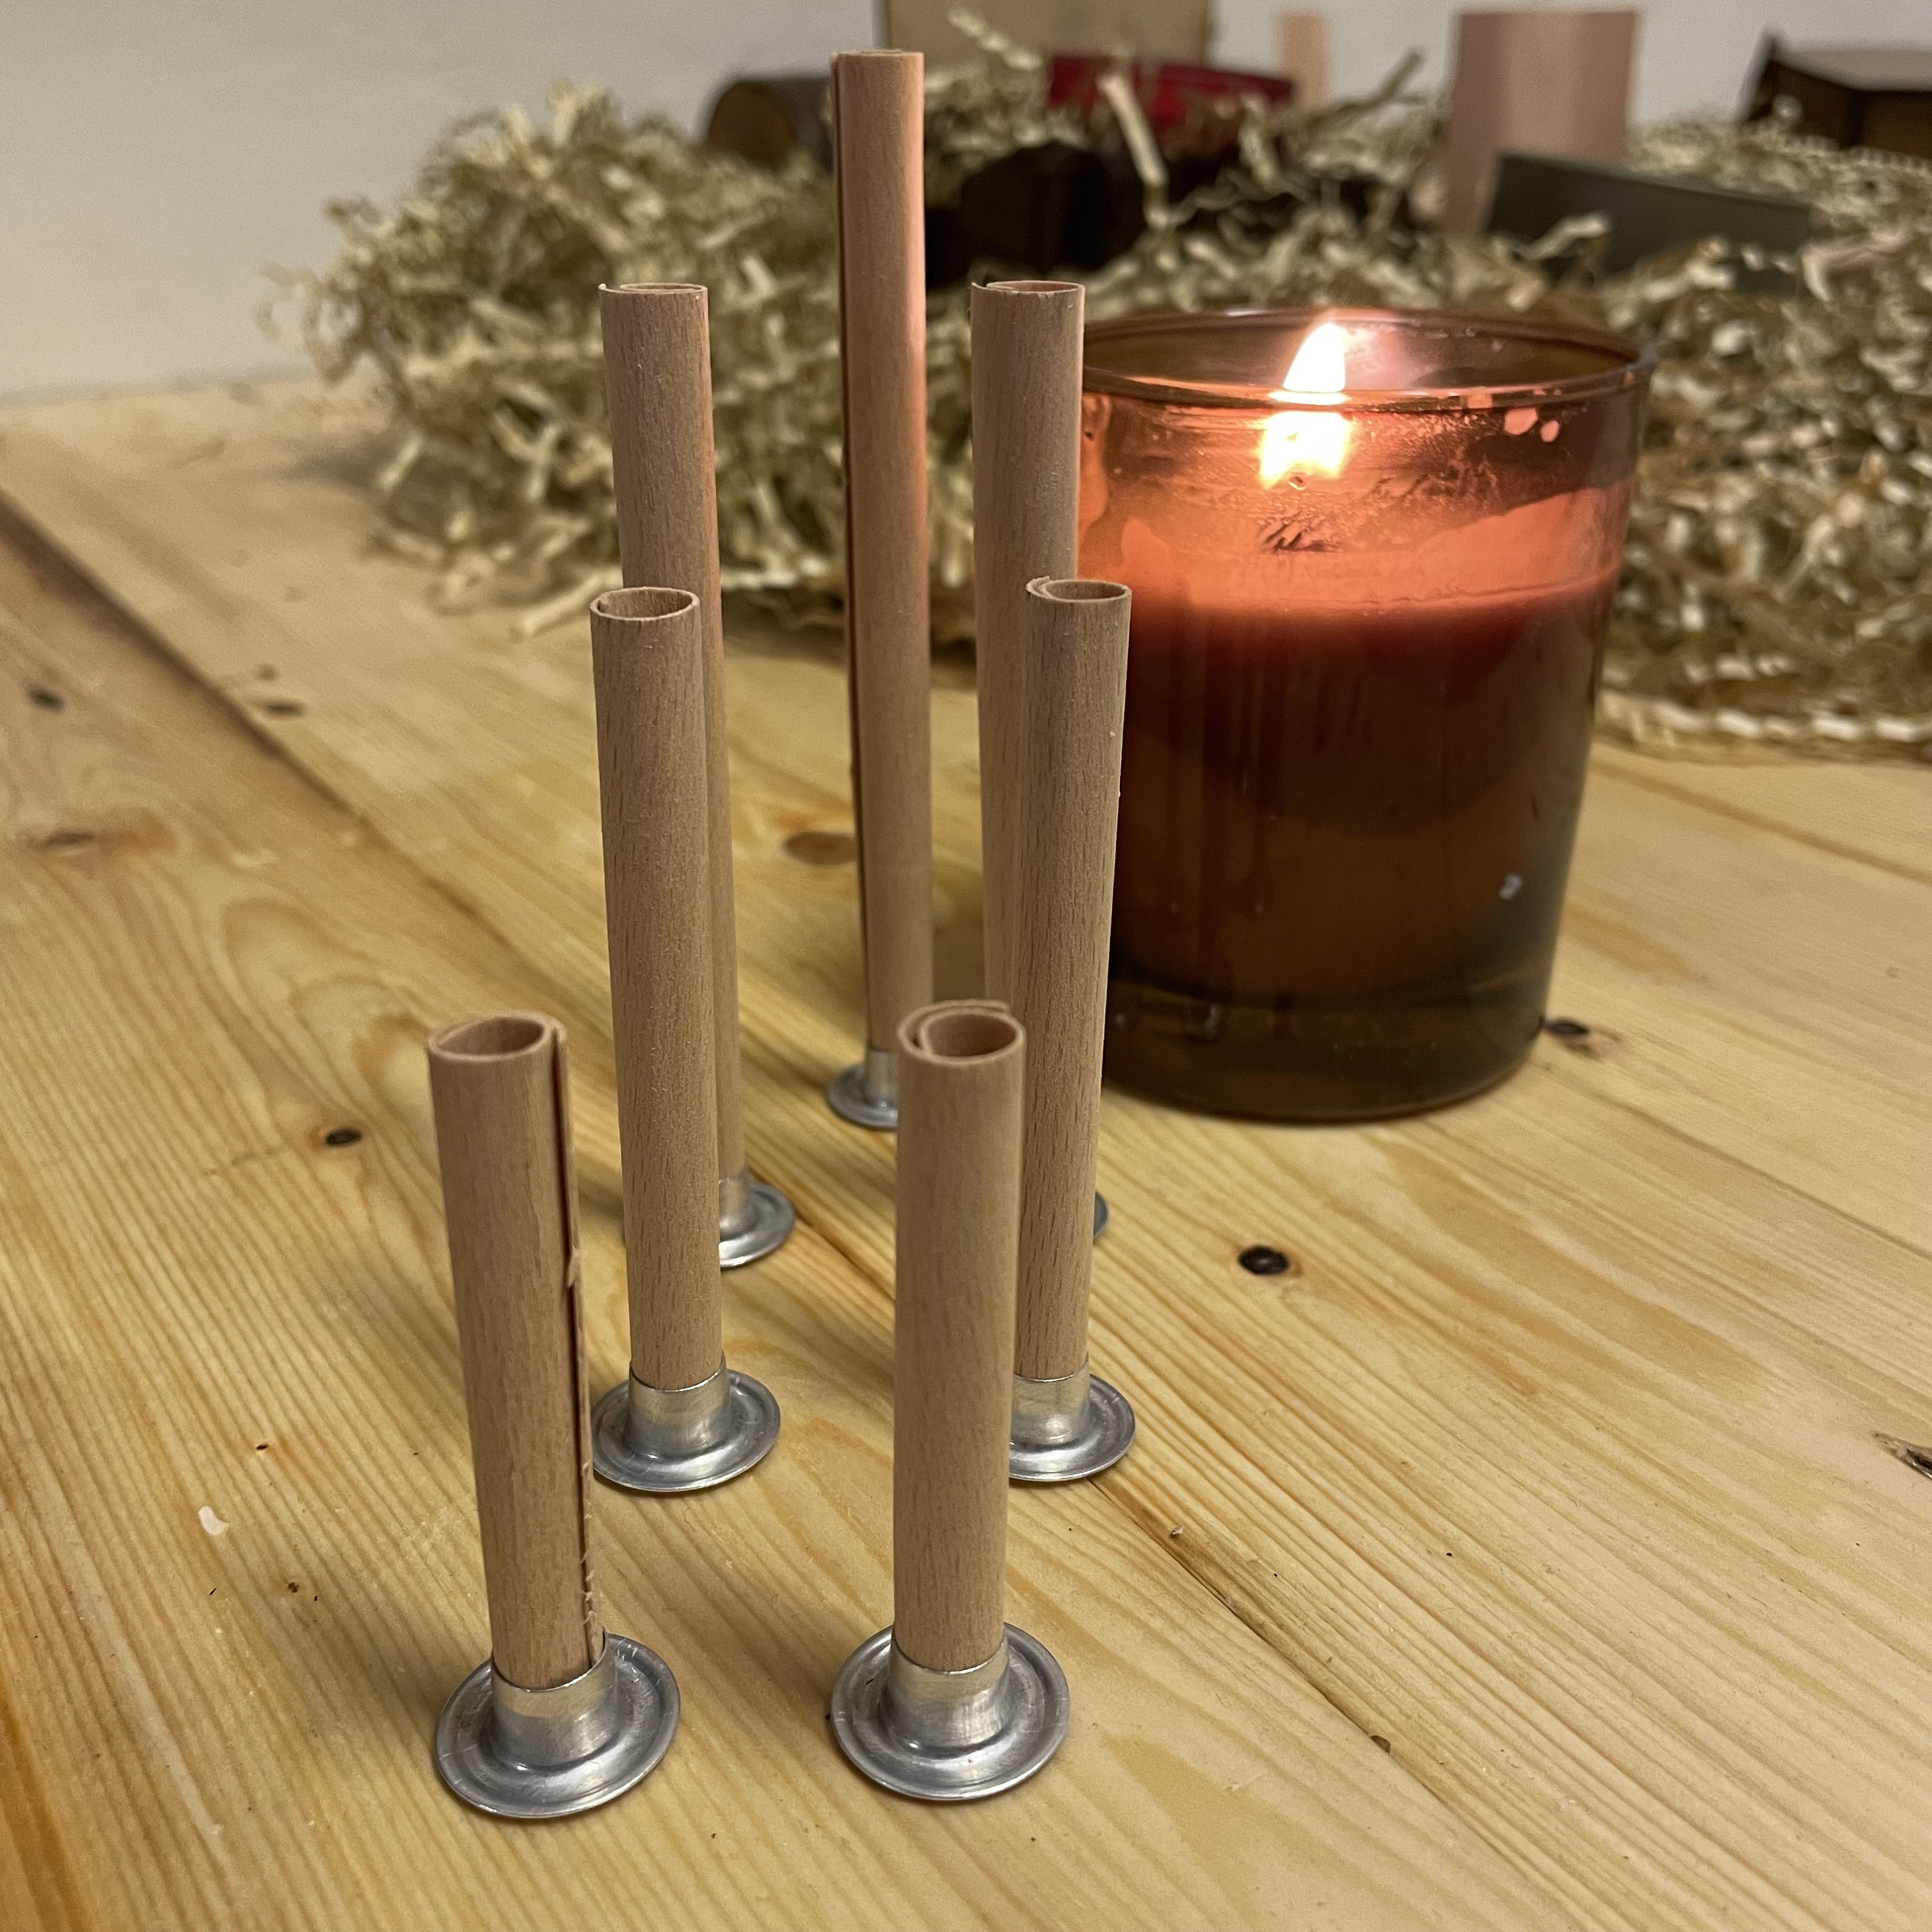 Wood Wicks for Candles, 100 Wood Candle Wicks 1Mm/0.4 Wood Wicks